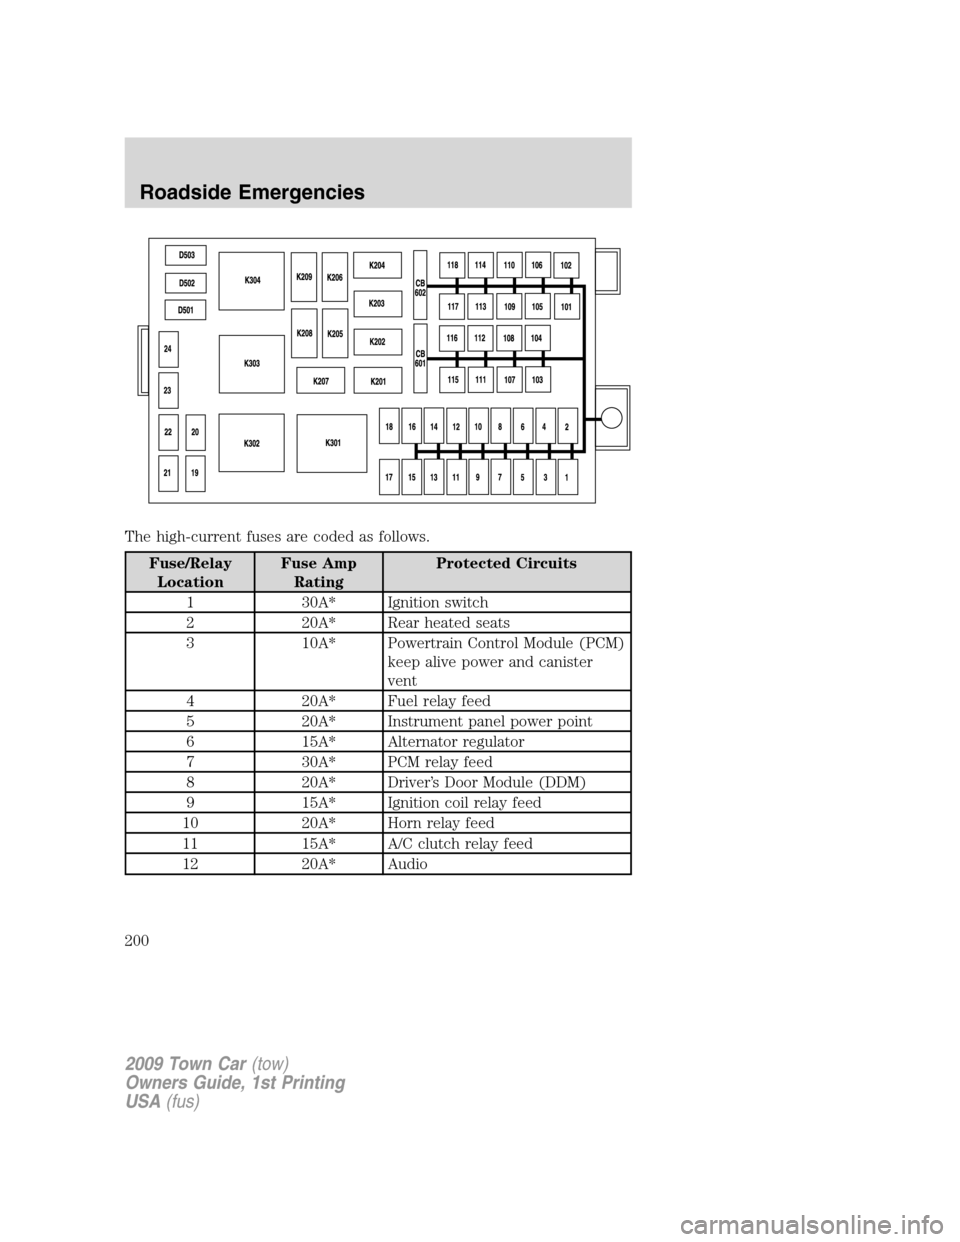 LINCOLN TOWN CAR 2009 User Guide The high-current fuses are coded as follows.
Fuse/Relay
LocationFuse Amp
RatingProtected Circuits
1 30A* Ignition switch
2 20A* Rear heated seats
3 10A* Powertrain Control Module (PCM)
keep alive powe